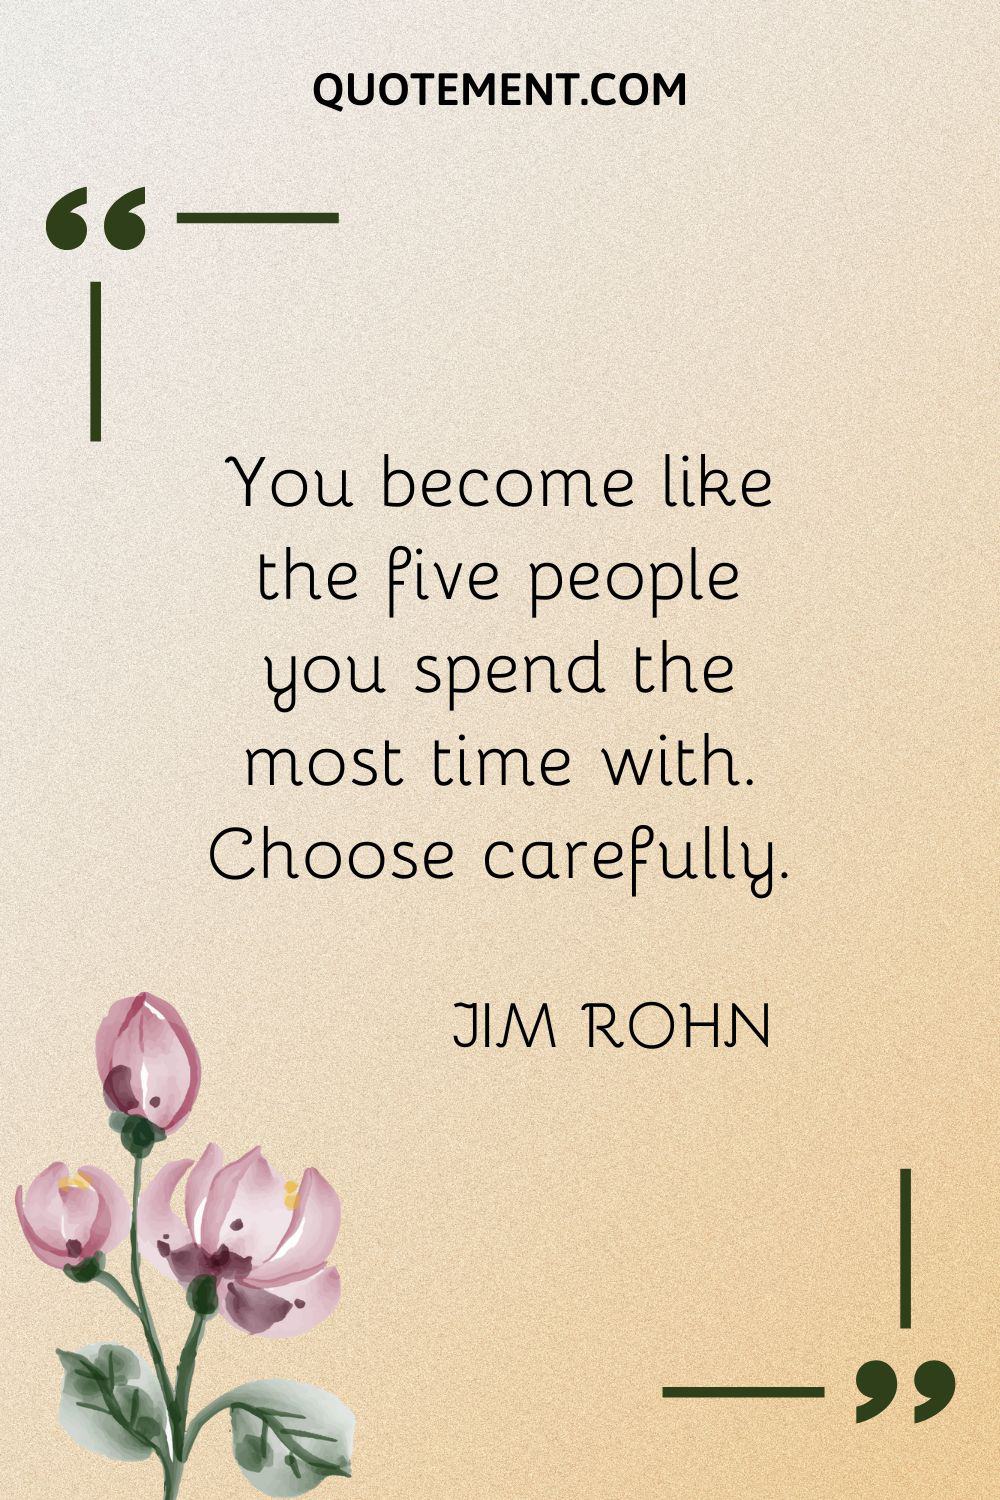 You become like the five people you spend the most time with